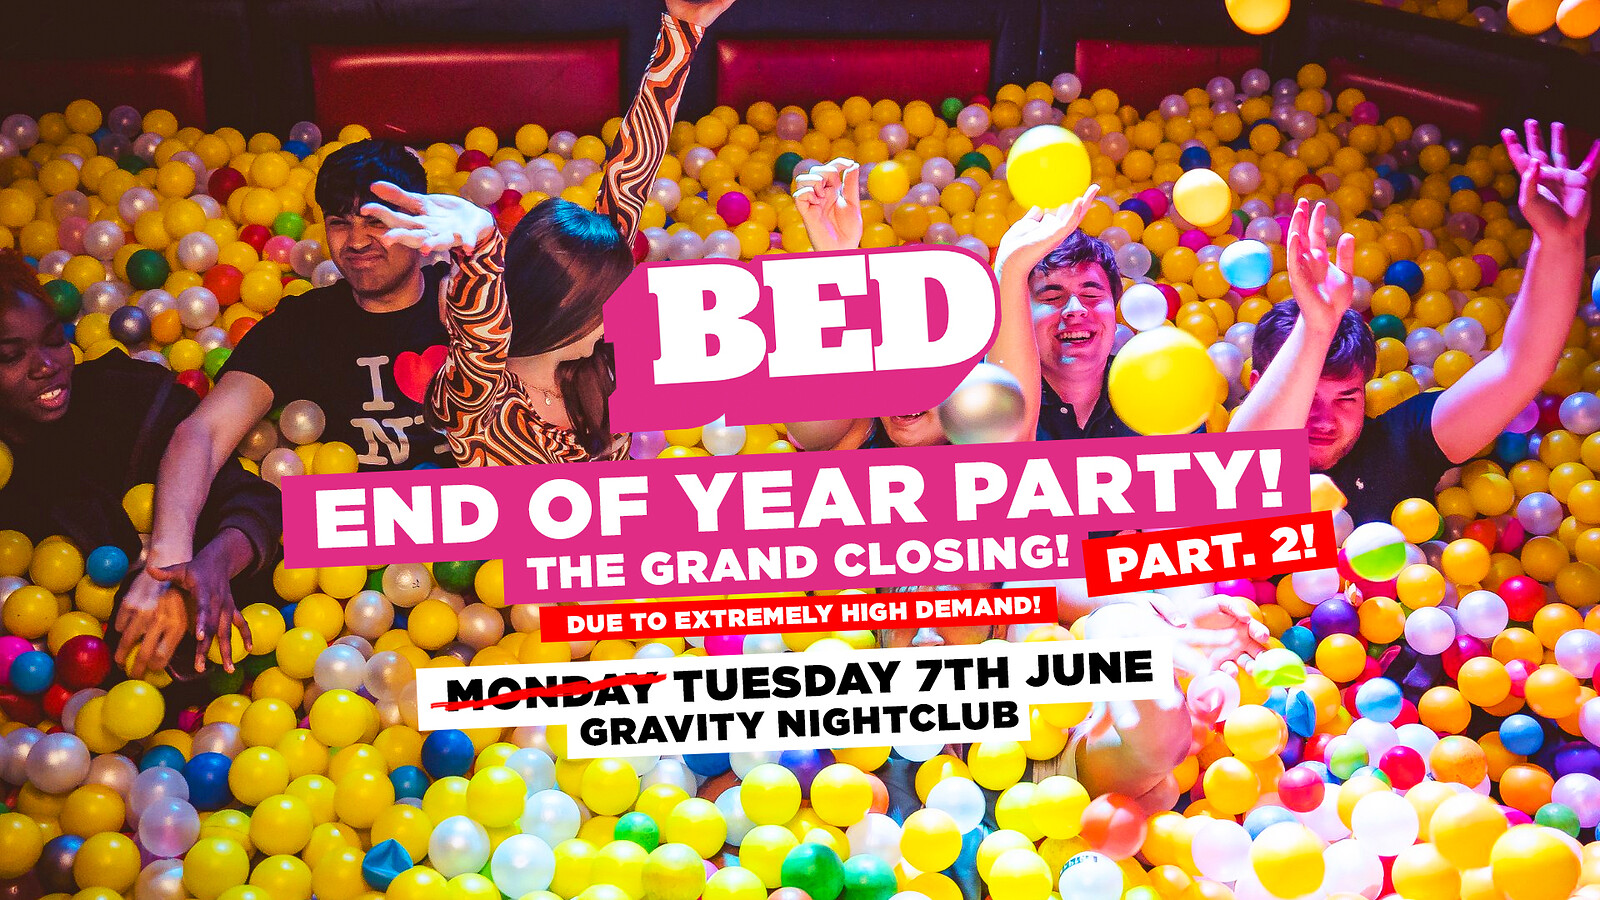 BED Tuesday: End of Year Closing Party at Gravity